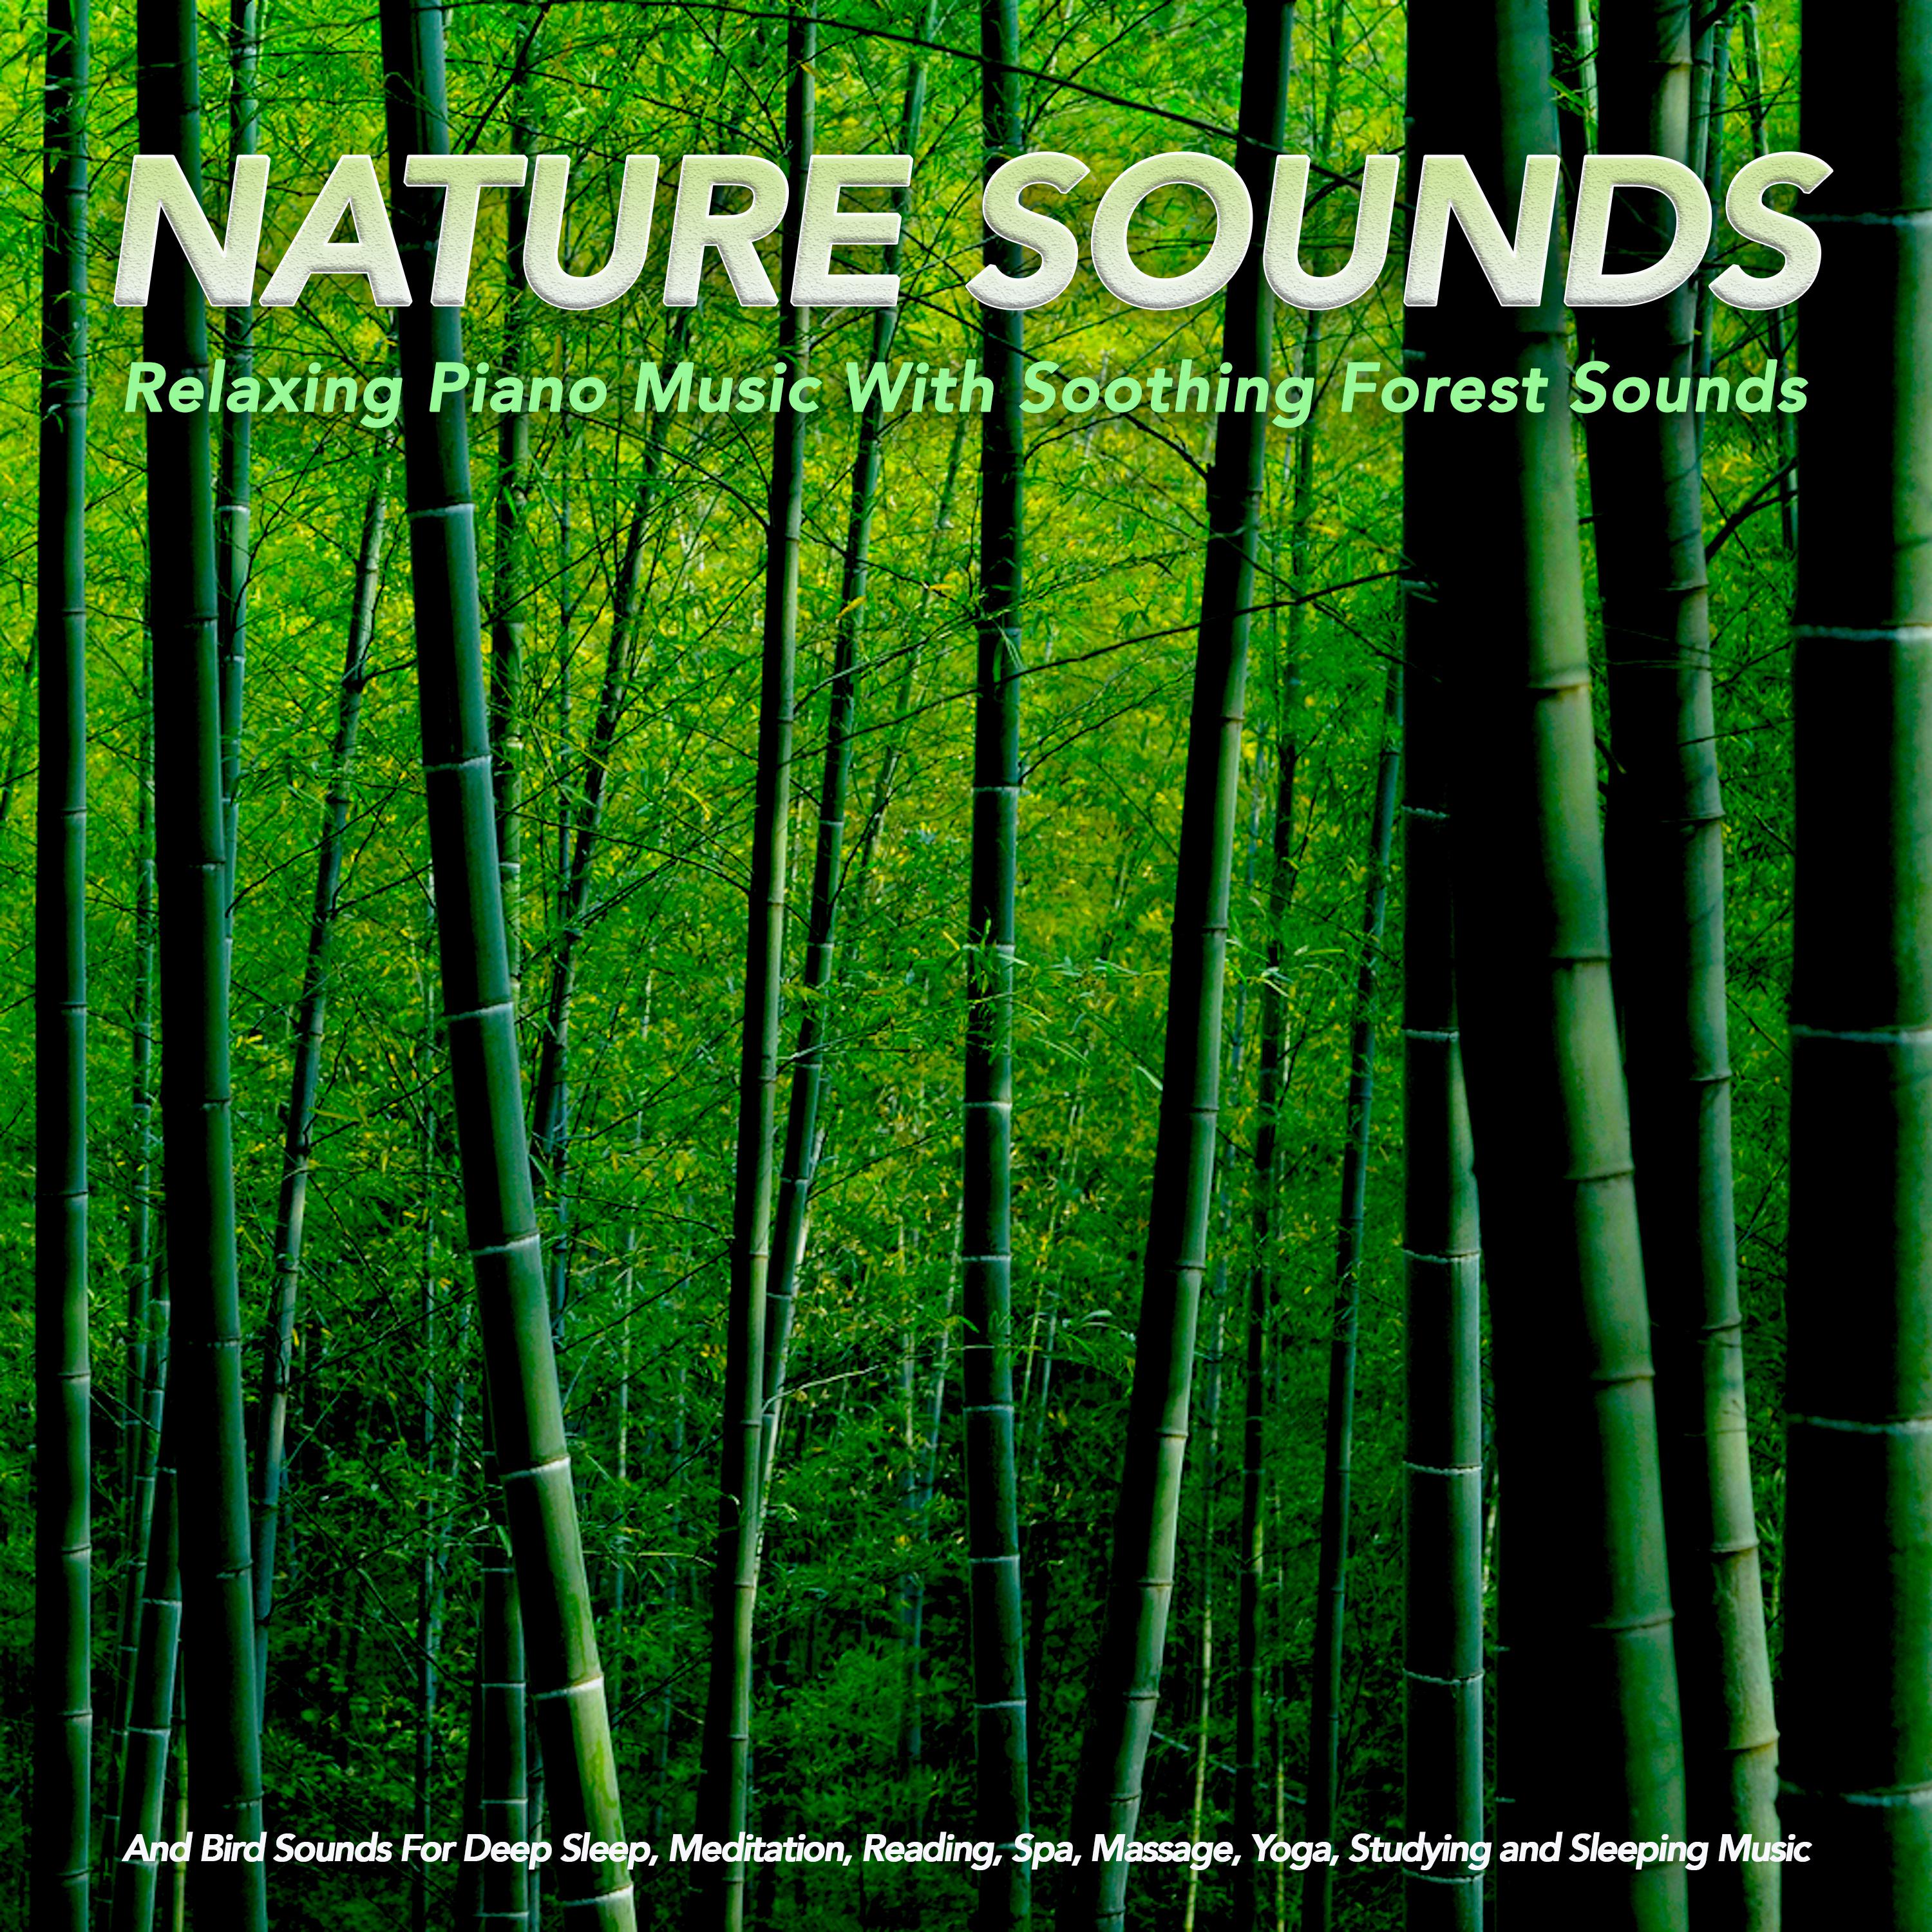 Sounds of the Forest For Meditation